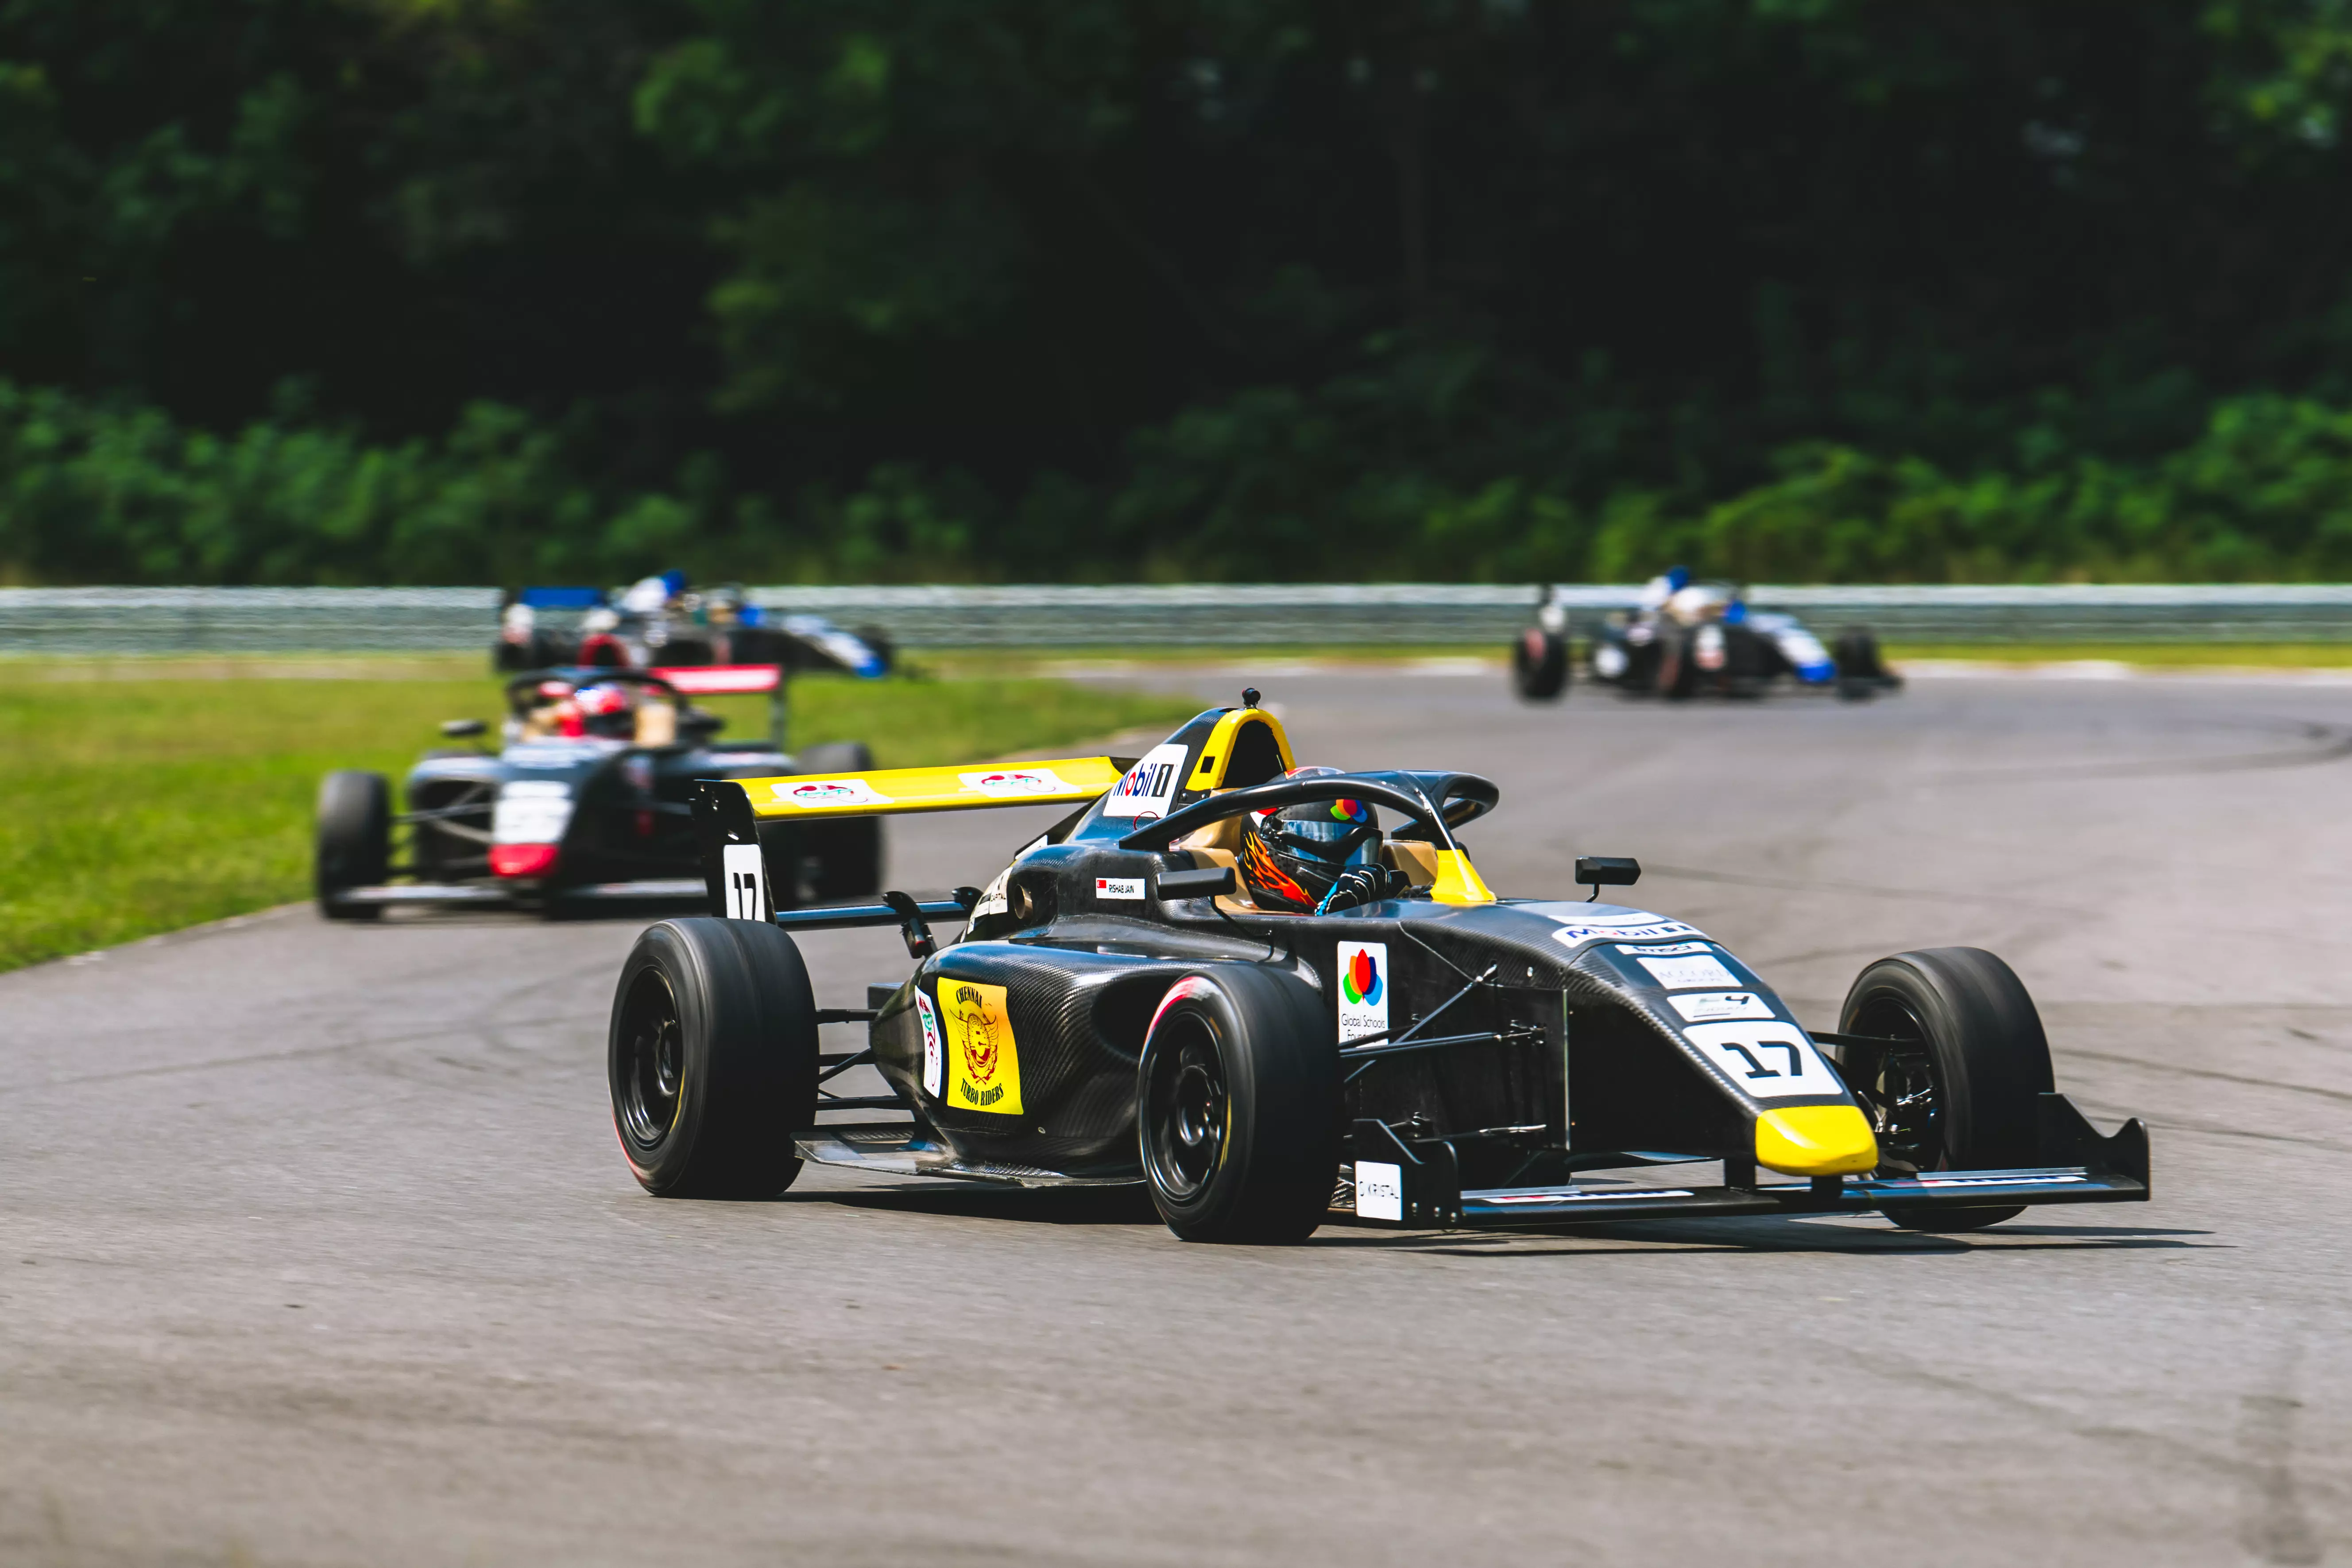 Cars in action during Formula 4 Indian championship.